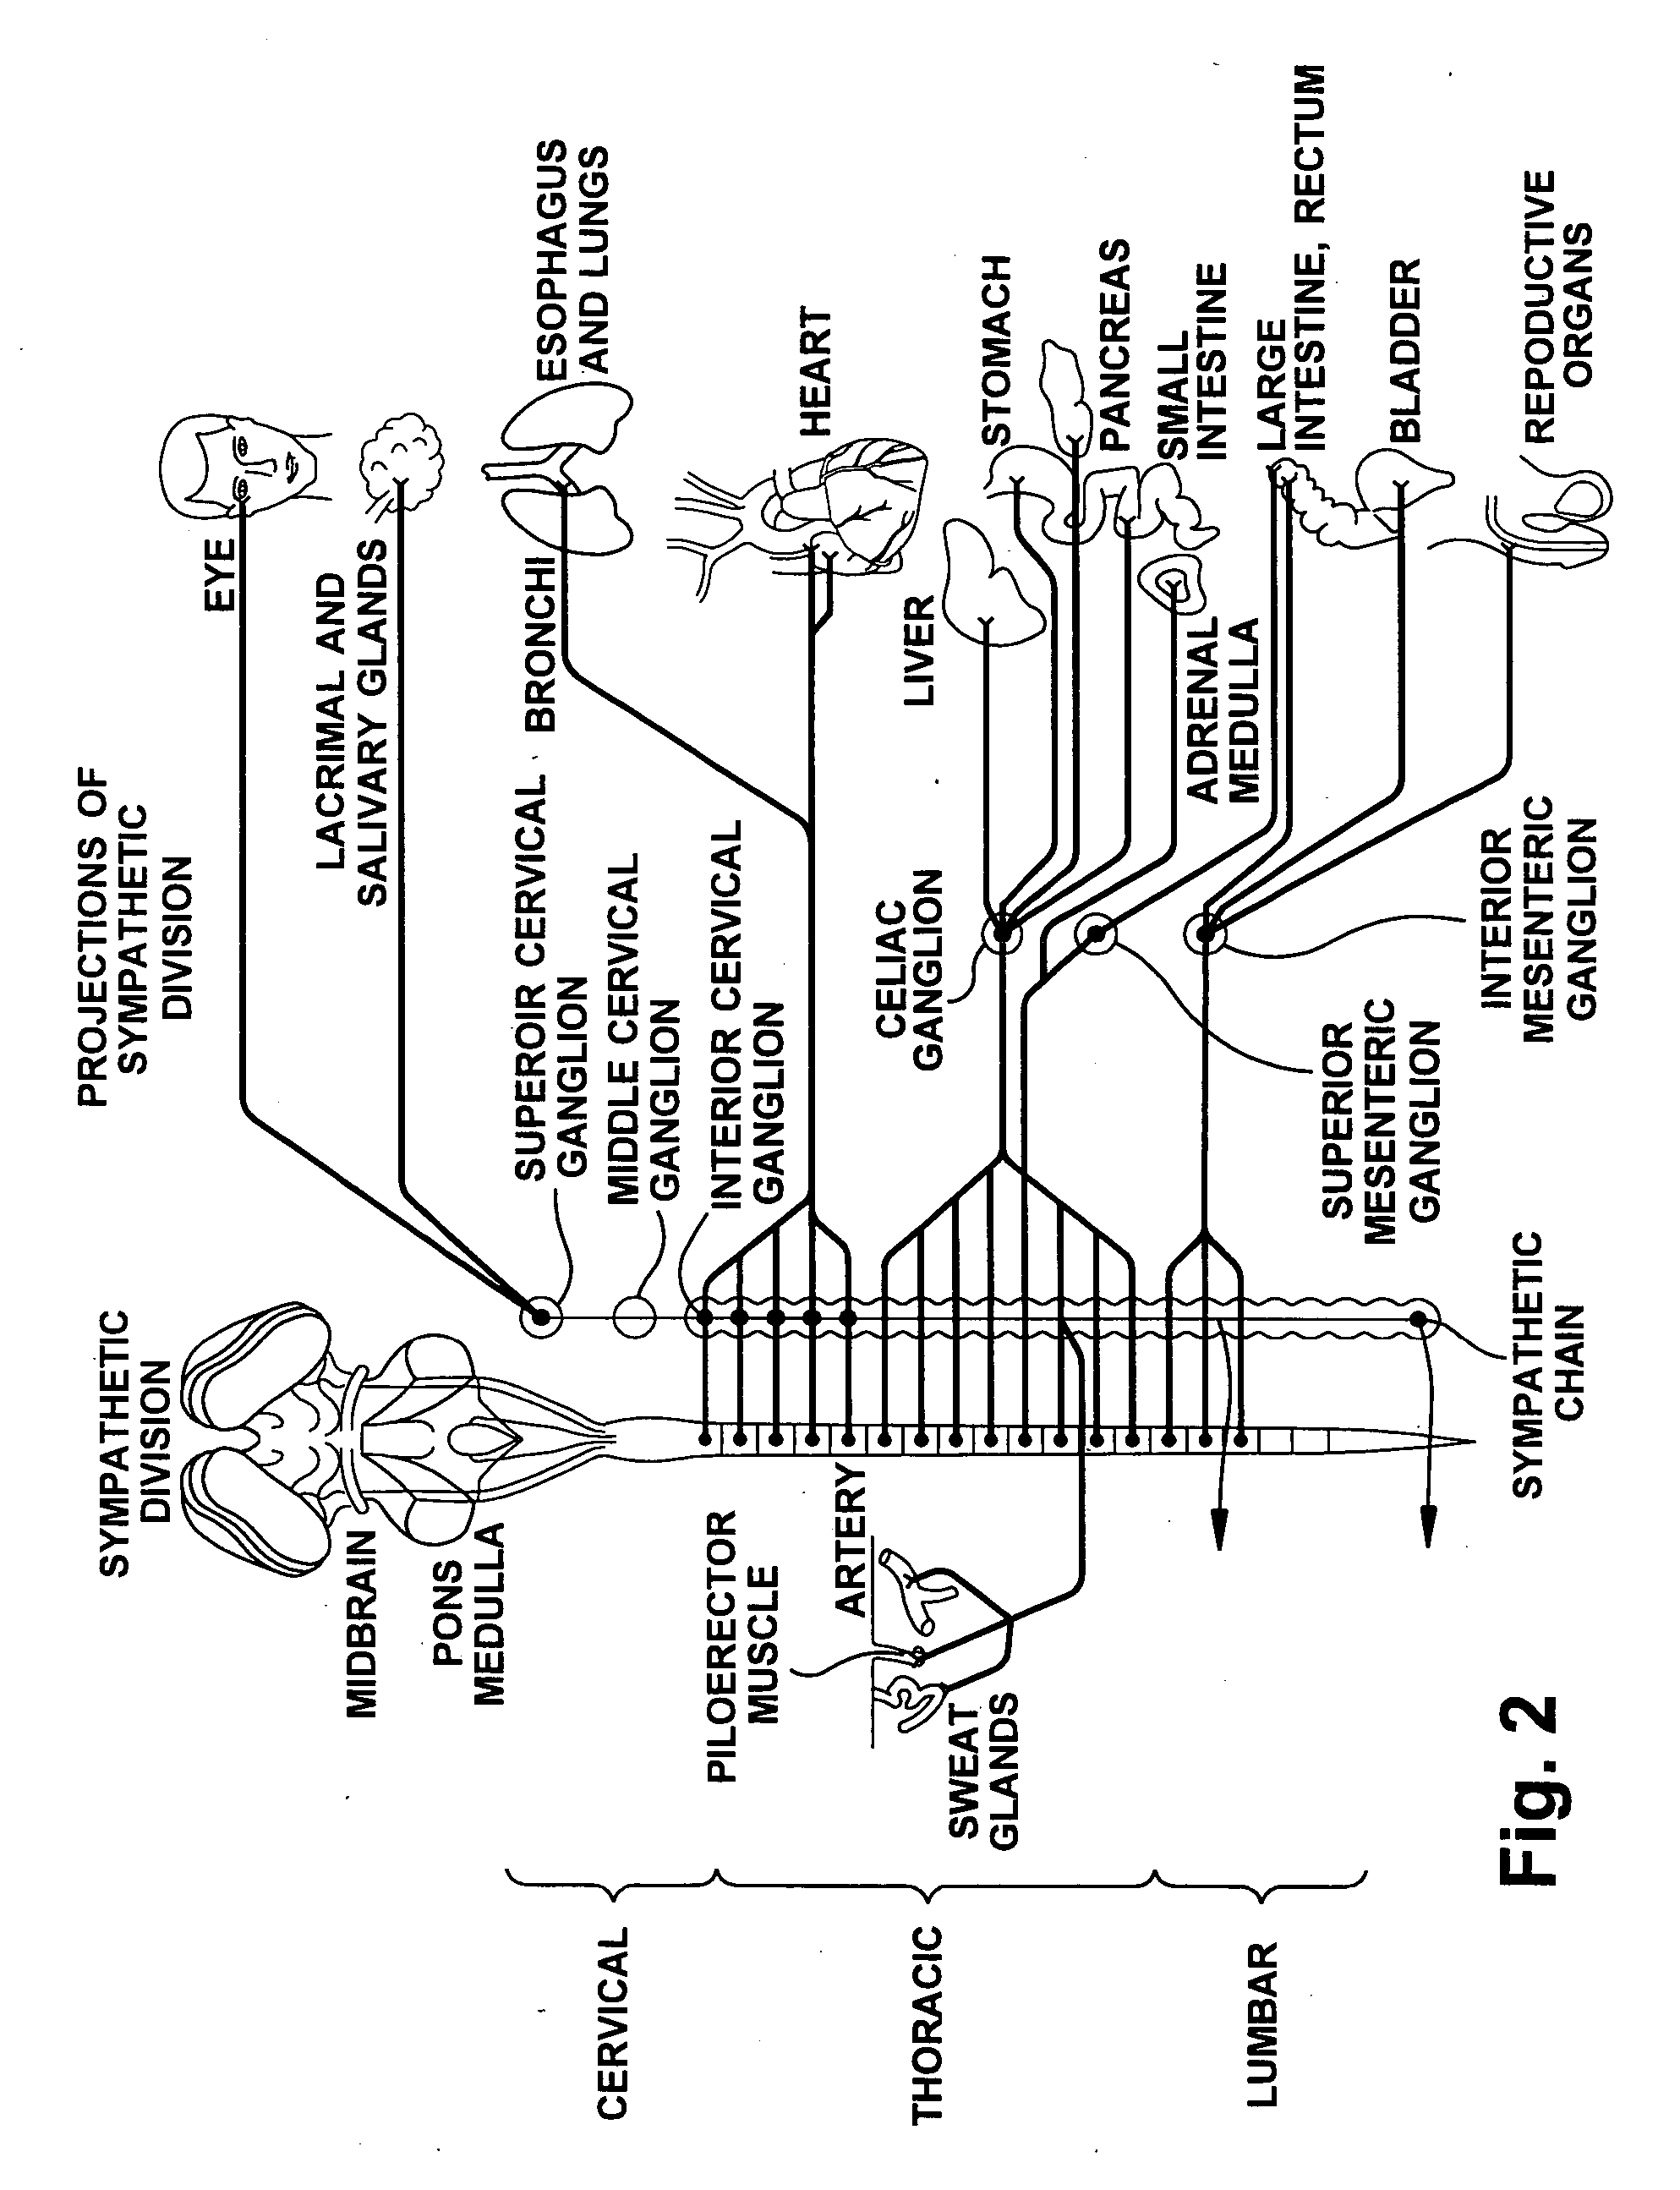 Apparatus and method for modulating the baroreflex system